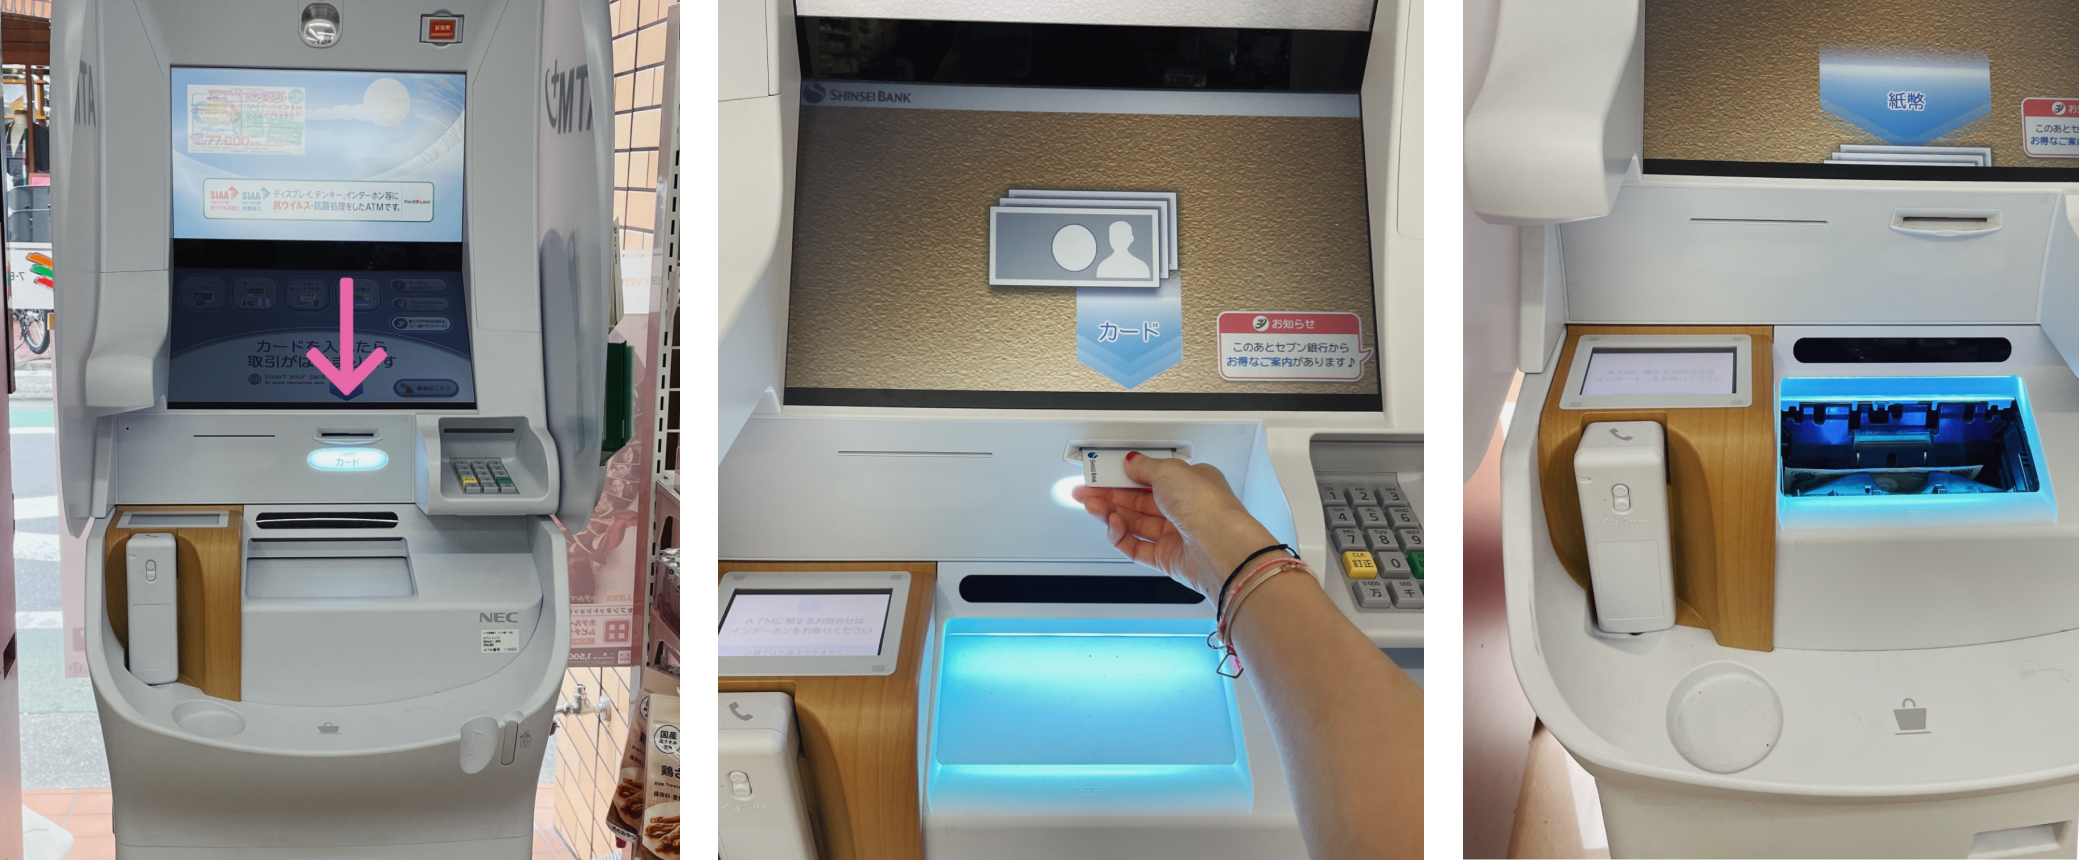 L-R, One: Photograph of a 7Bank ATM machine. An arrow points to the glowing card slot area. Two: Photograph of a hand inserting an ATM card into the 7Bank ATM machine. Three: Photograph of the 7Bank ATM with the cash slot open and lit with a blue light.